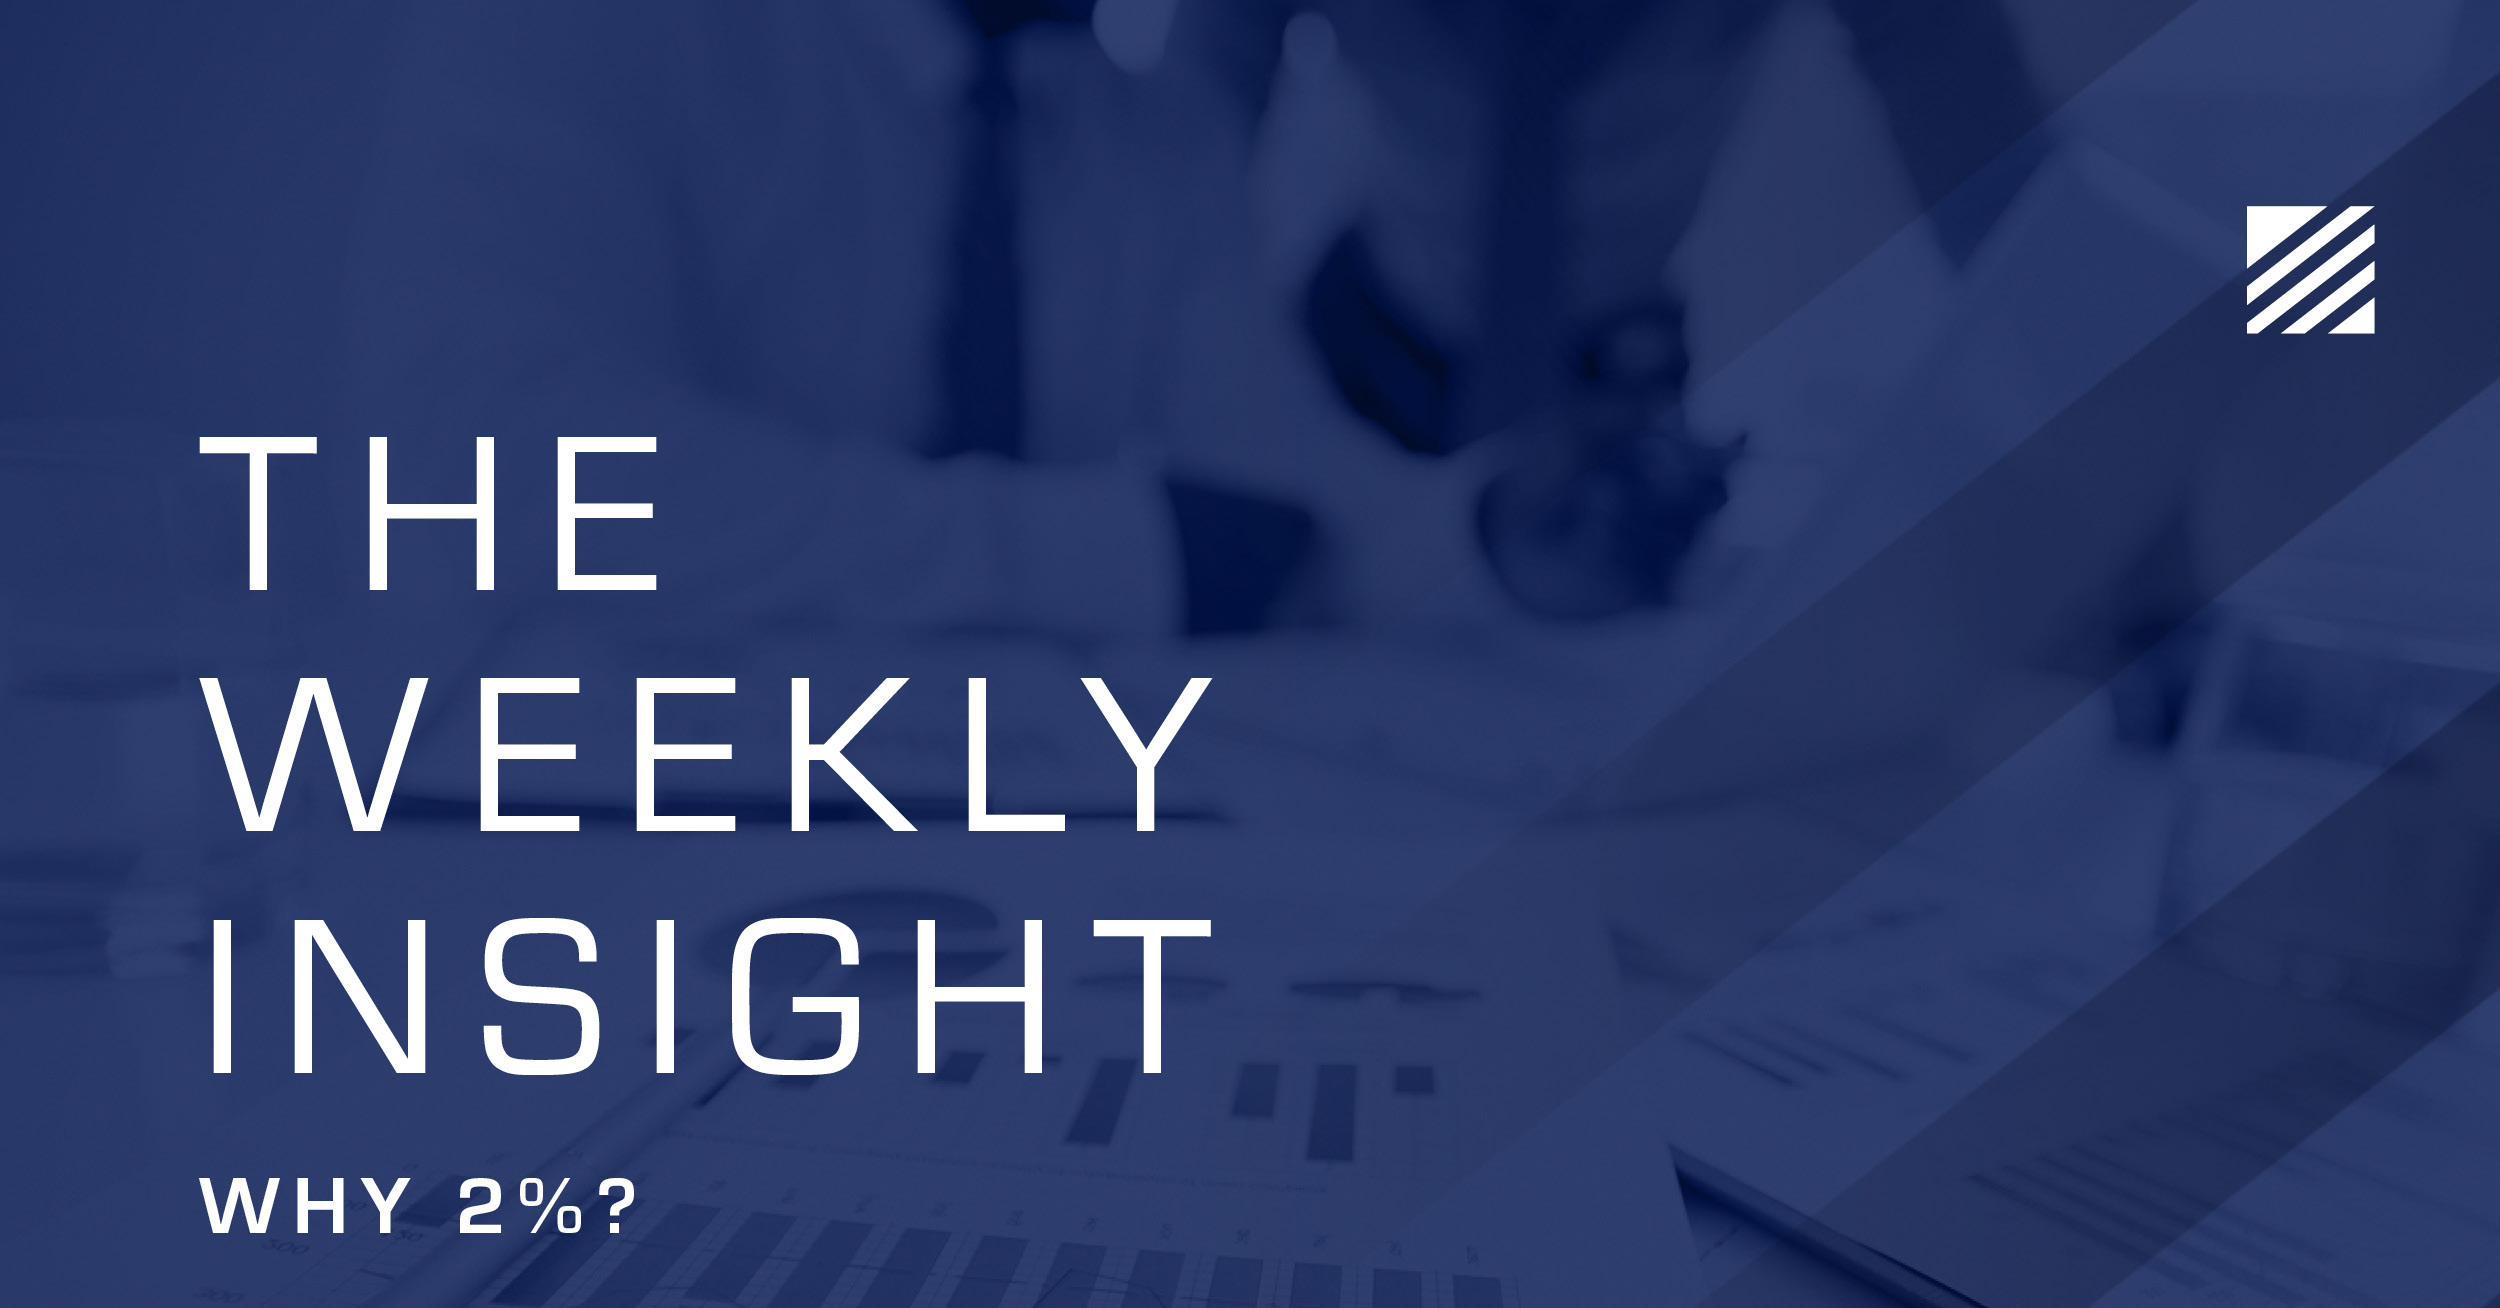 The Weekly Insight: Why 2%? Graphic